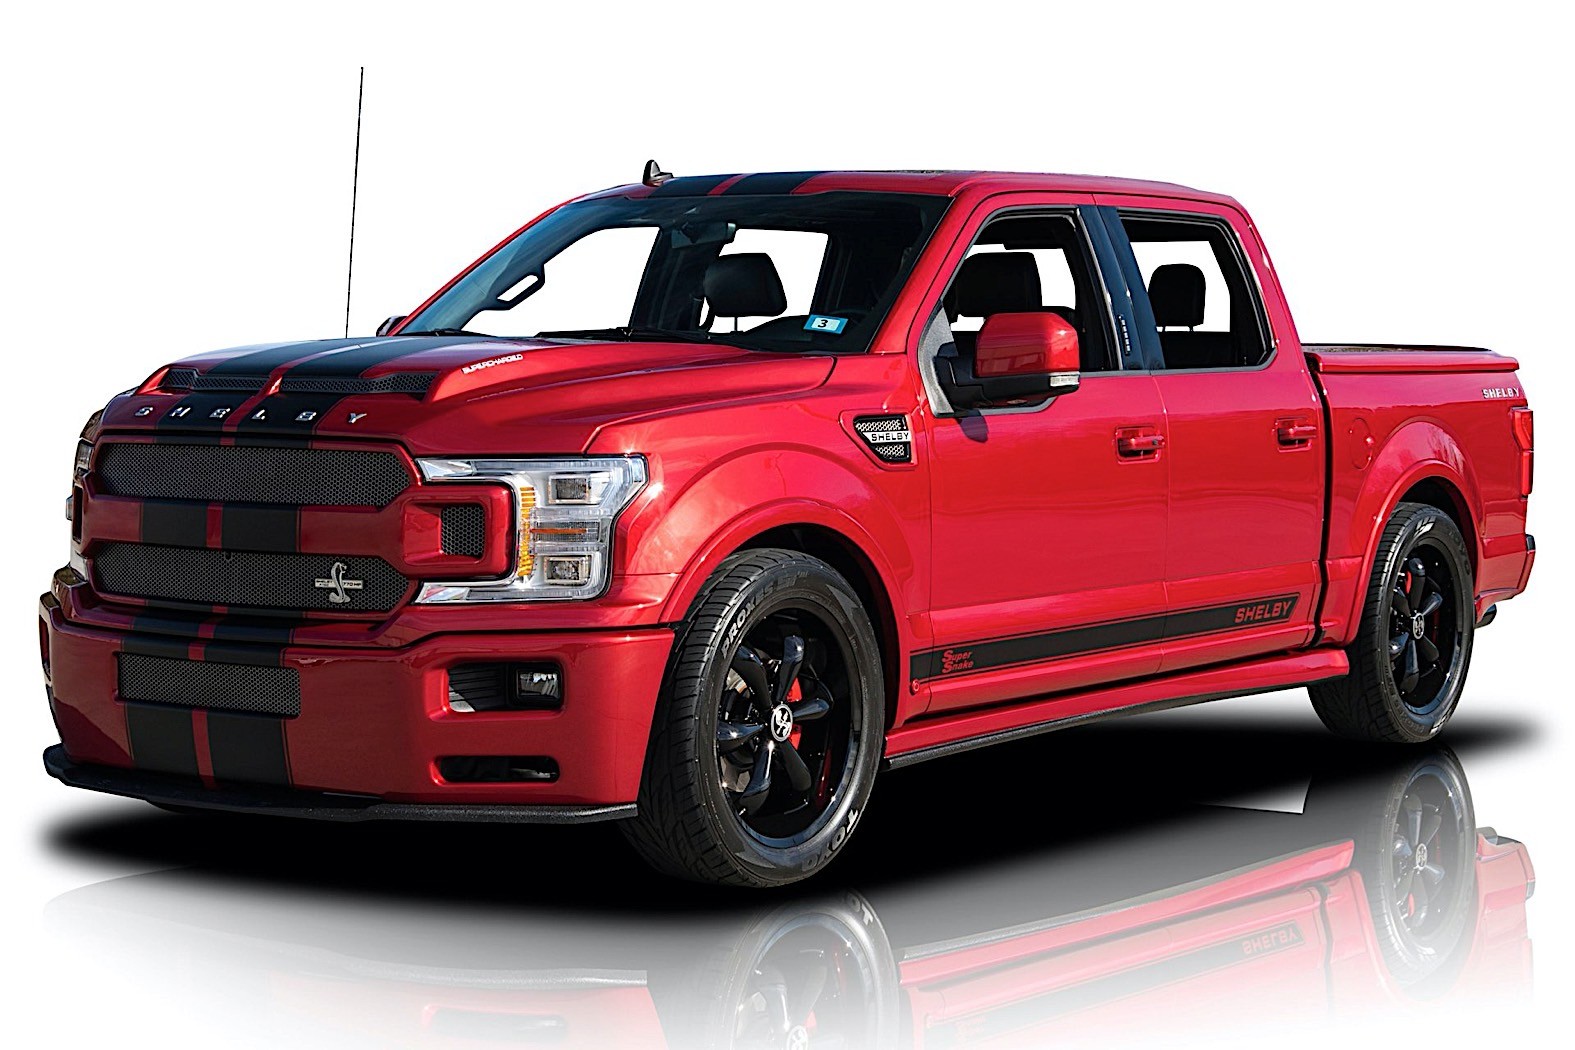 One Got Tired of a 2020 Shelby F-150 Super Snake Fast, Selling It for